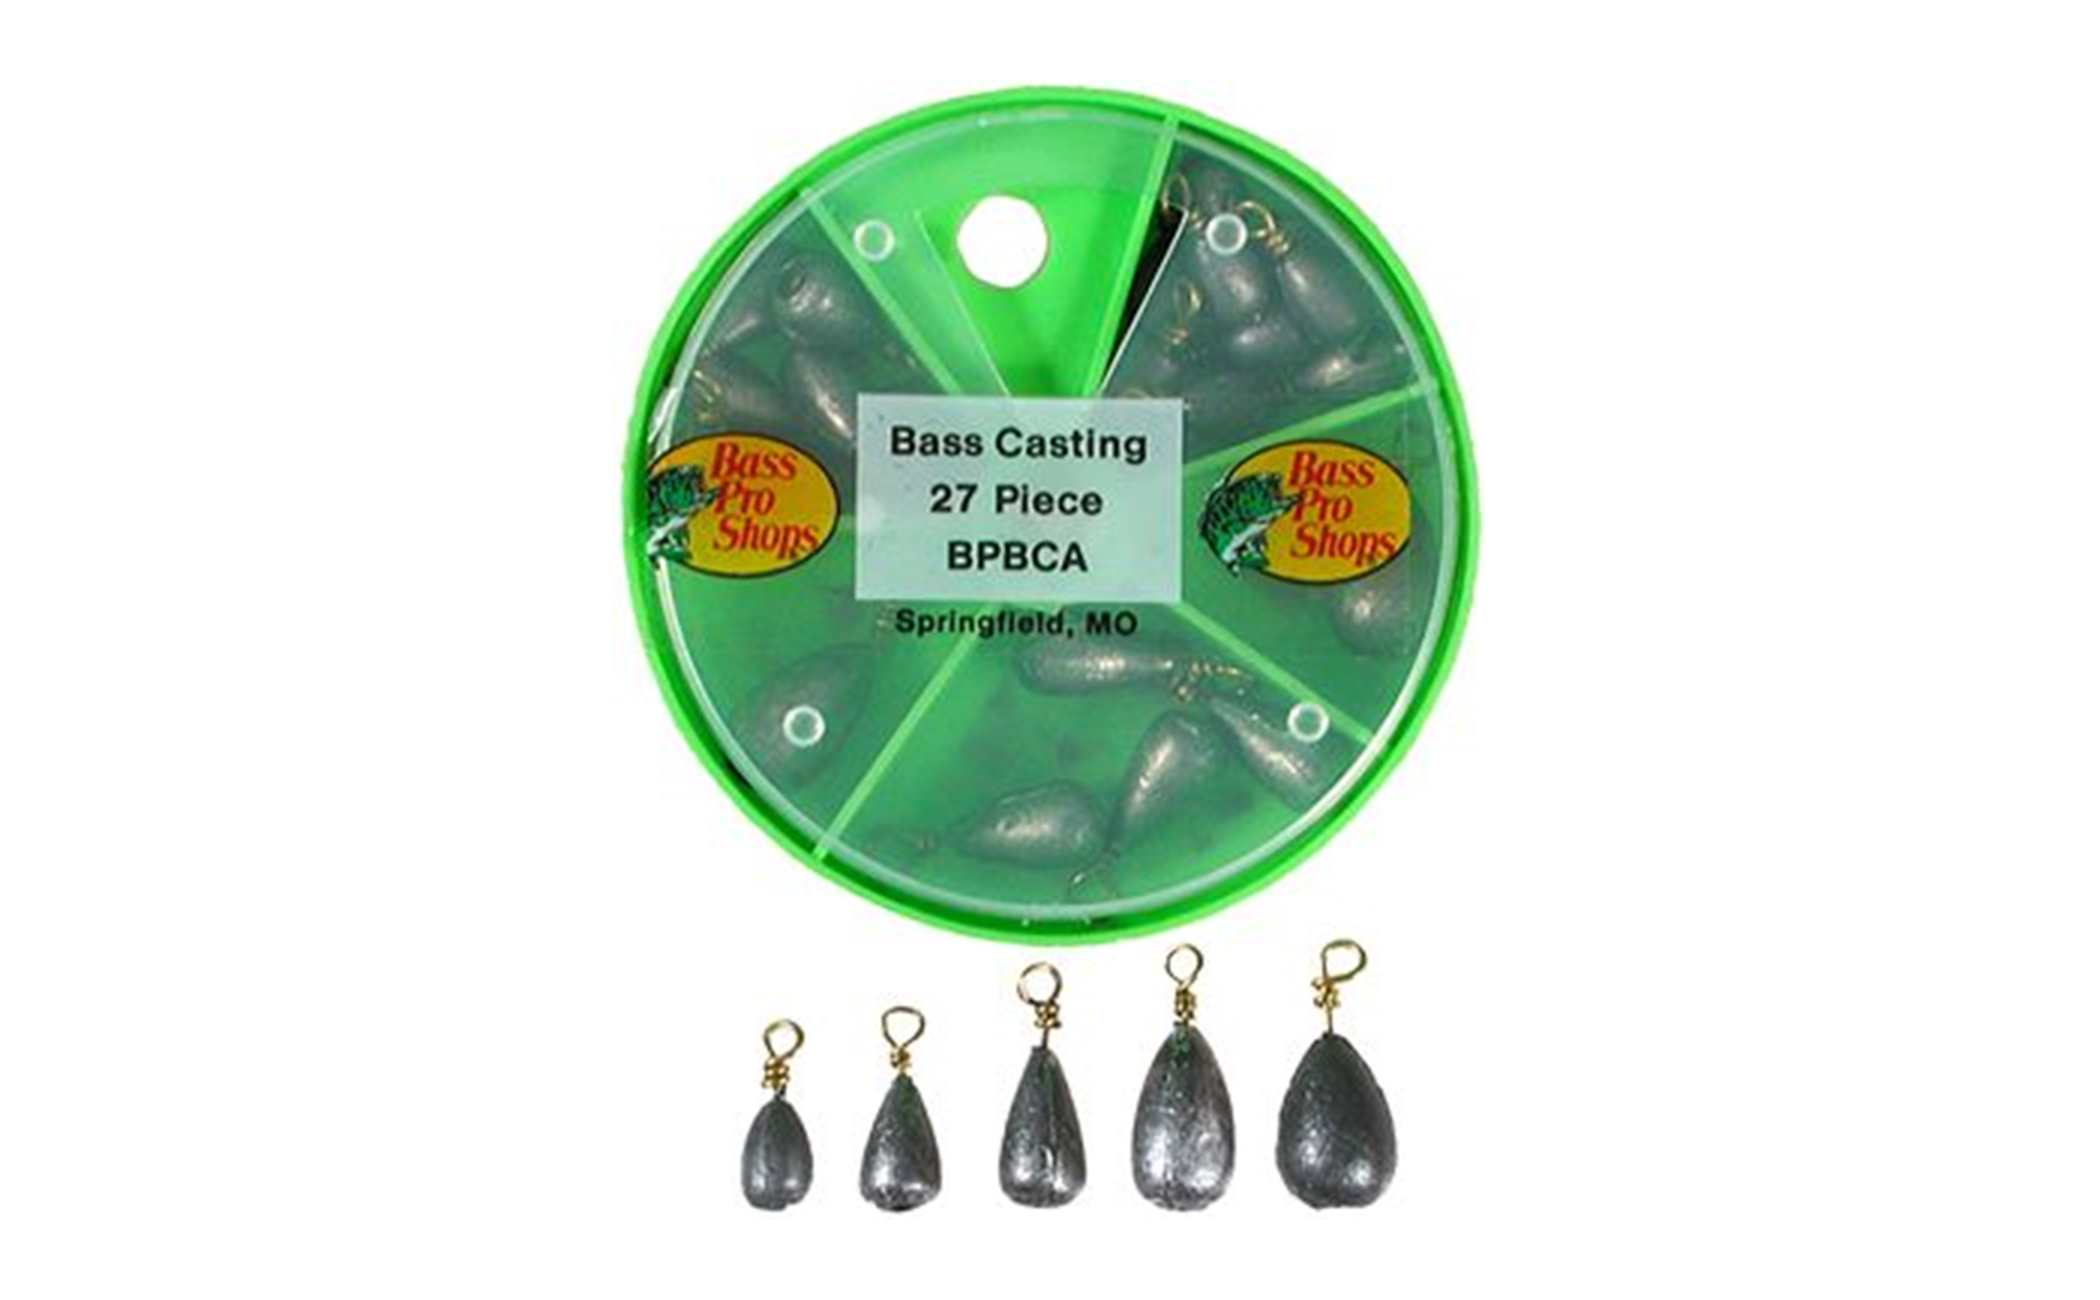 Fishing Weights Buyer's Guide